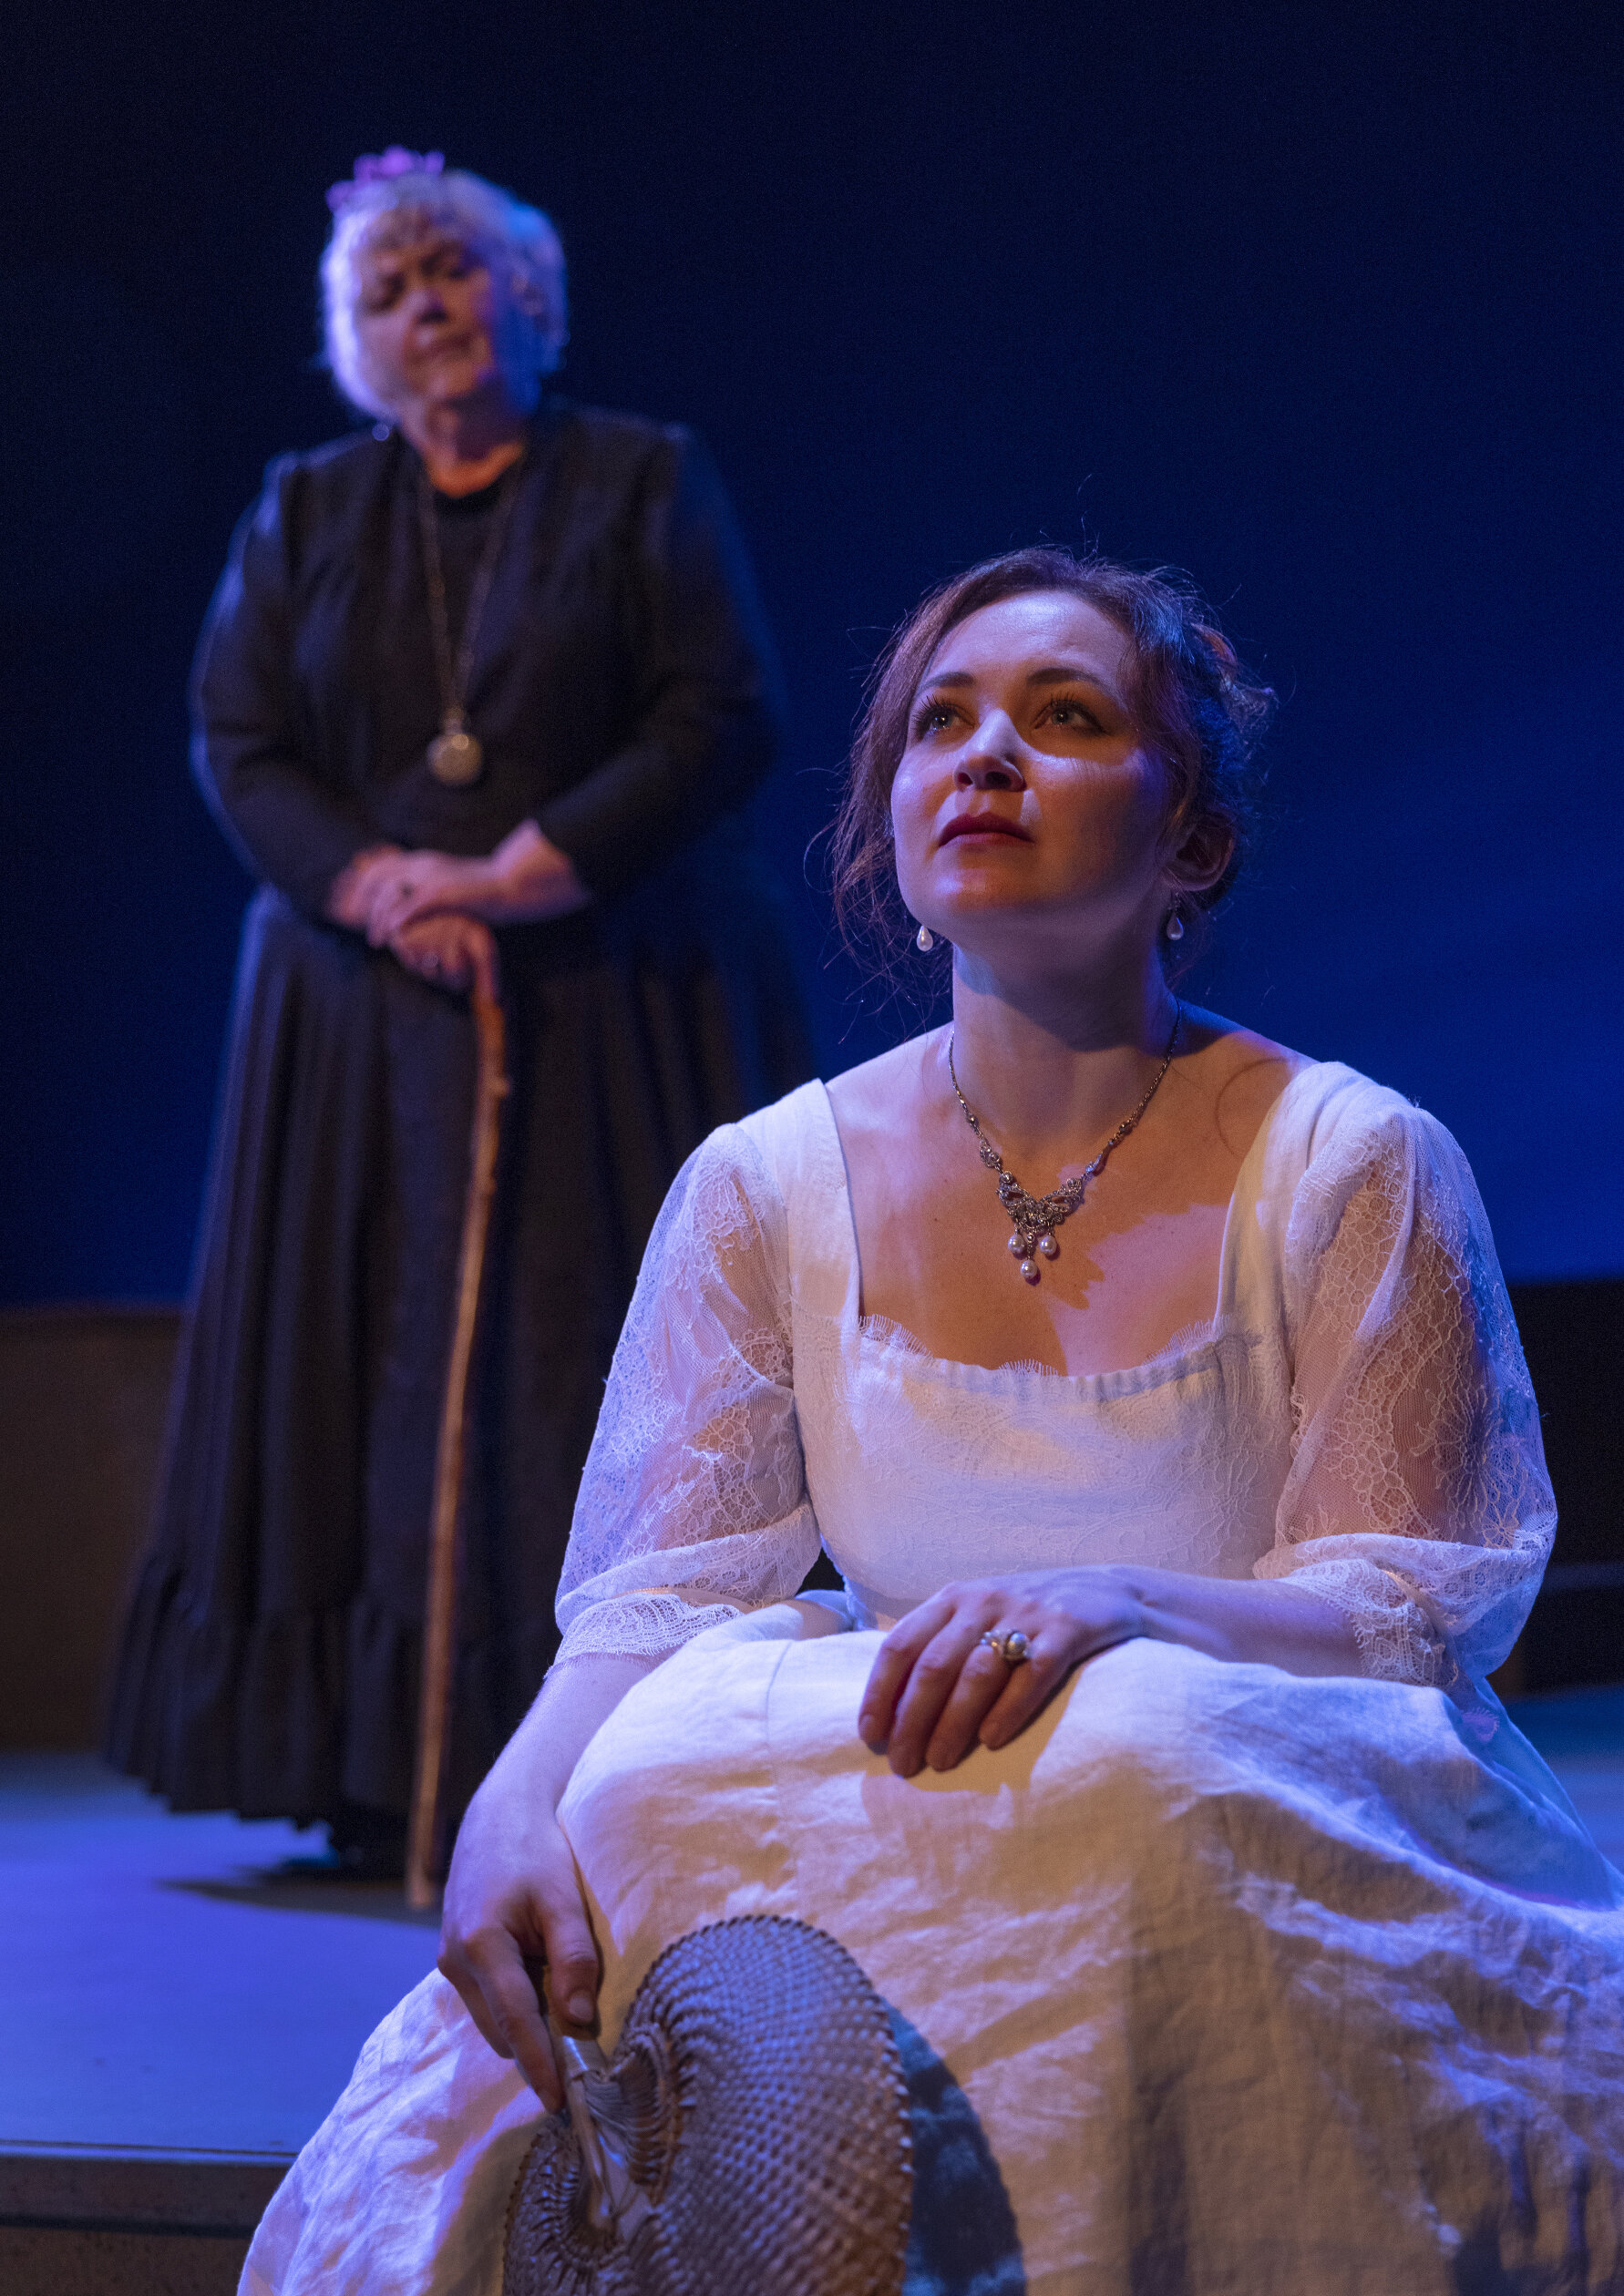 Cynthia Meier as Mmle. Reisz and Bryn Booth as Edna Pontellier. Photo by Tim Fuller.